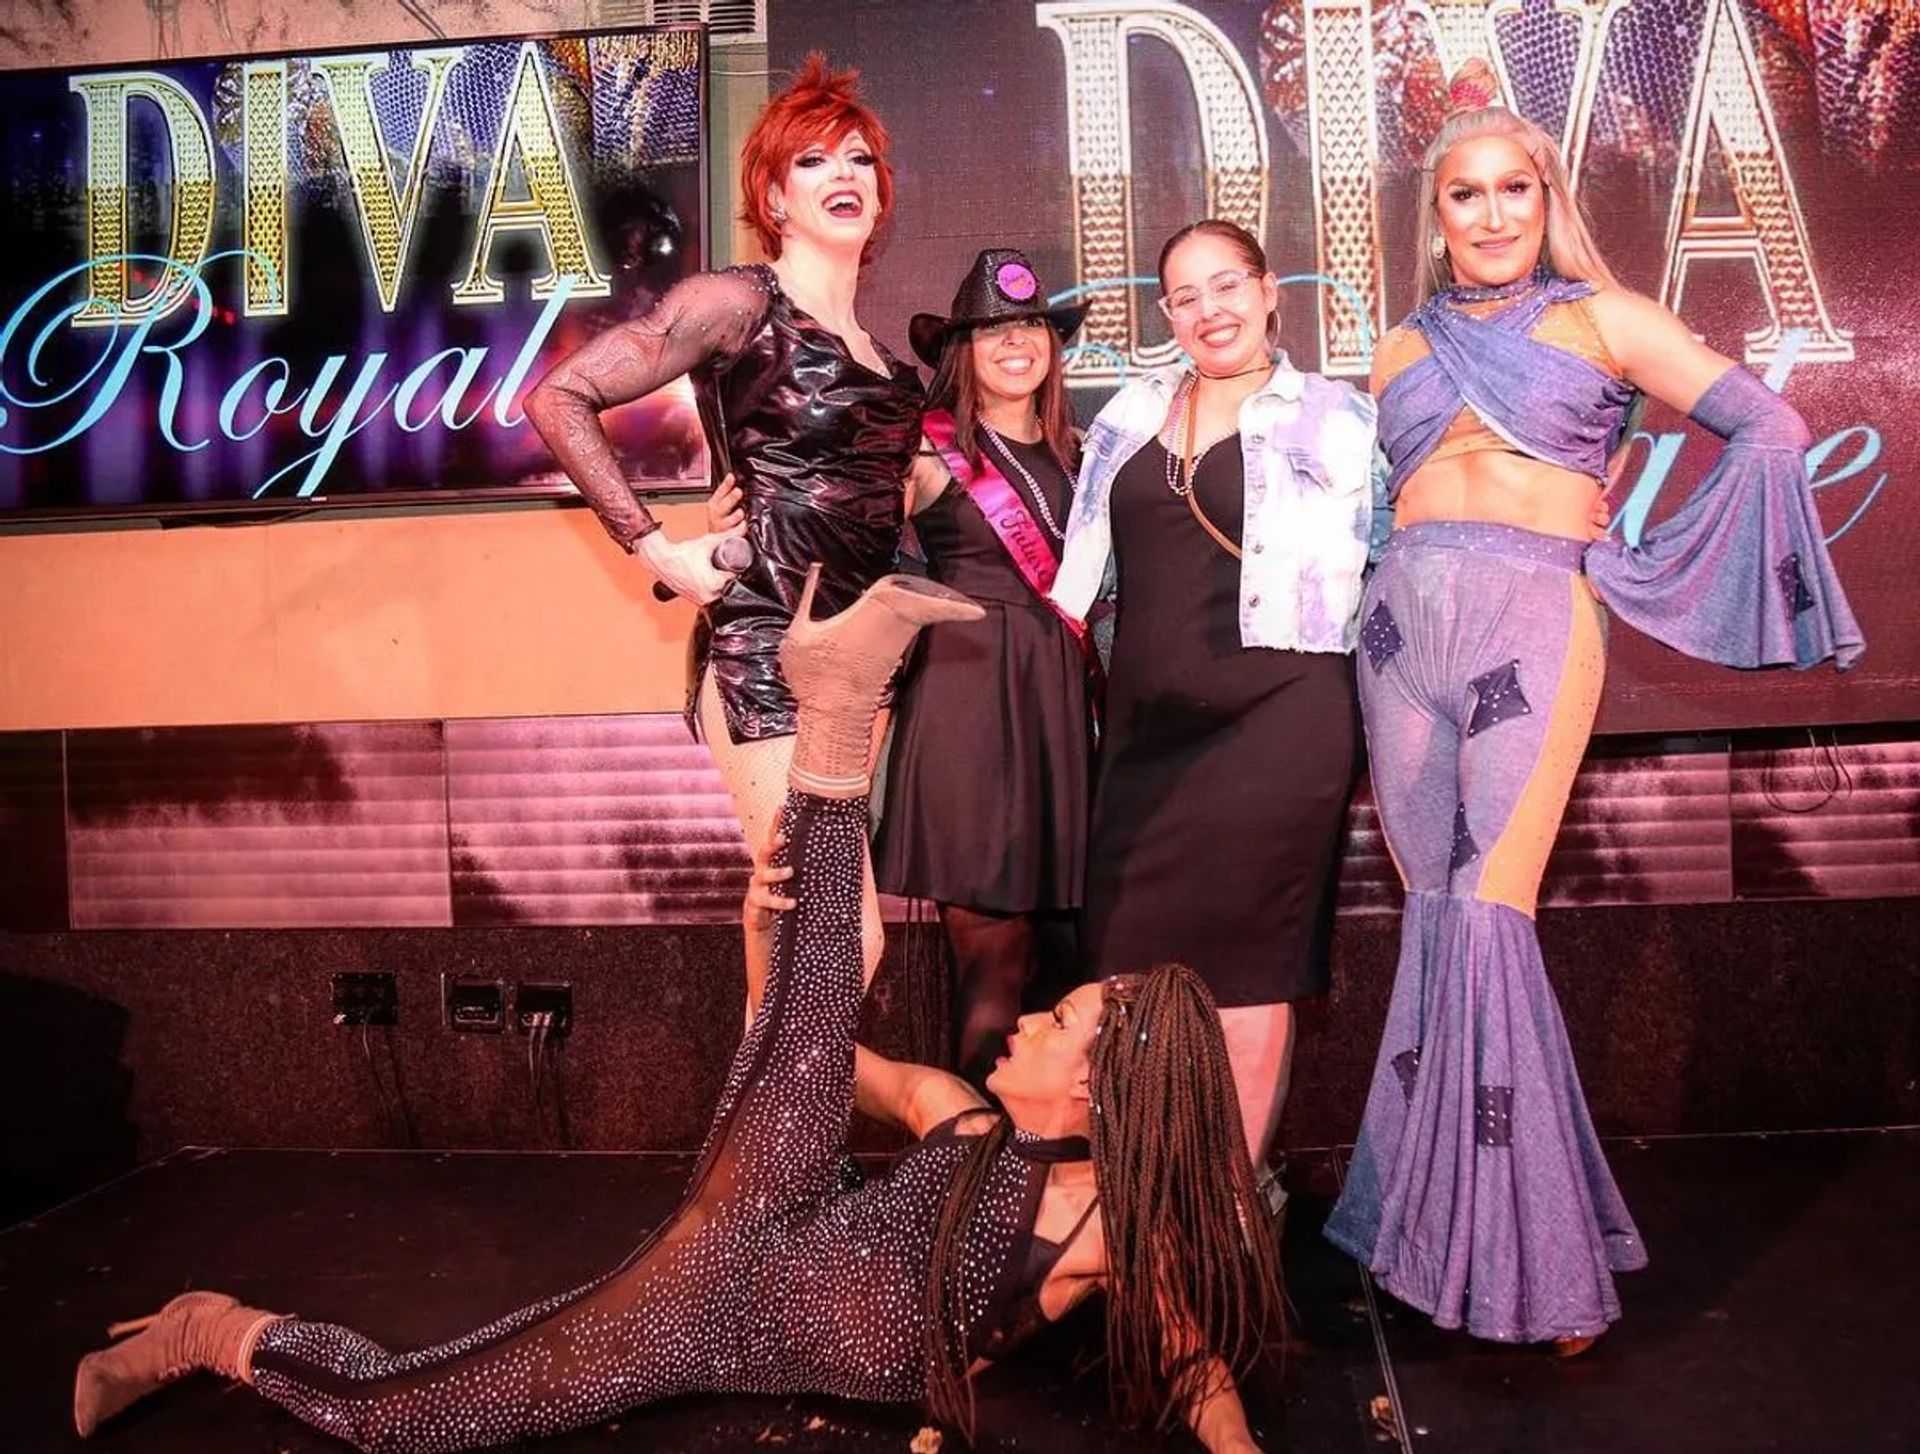 Drag Queen Shows at Tampa's Diva Royale image 12